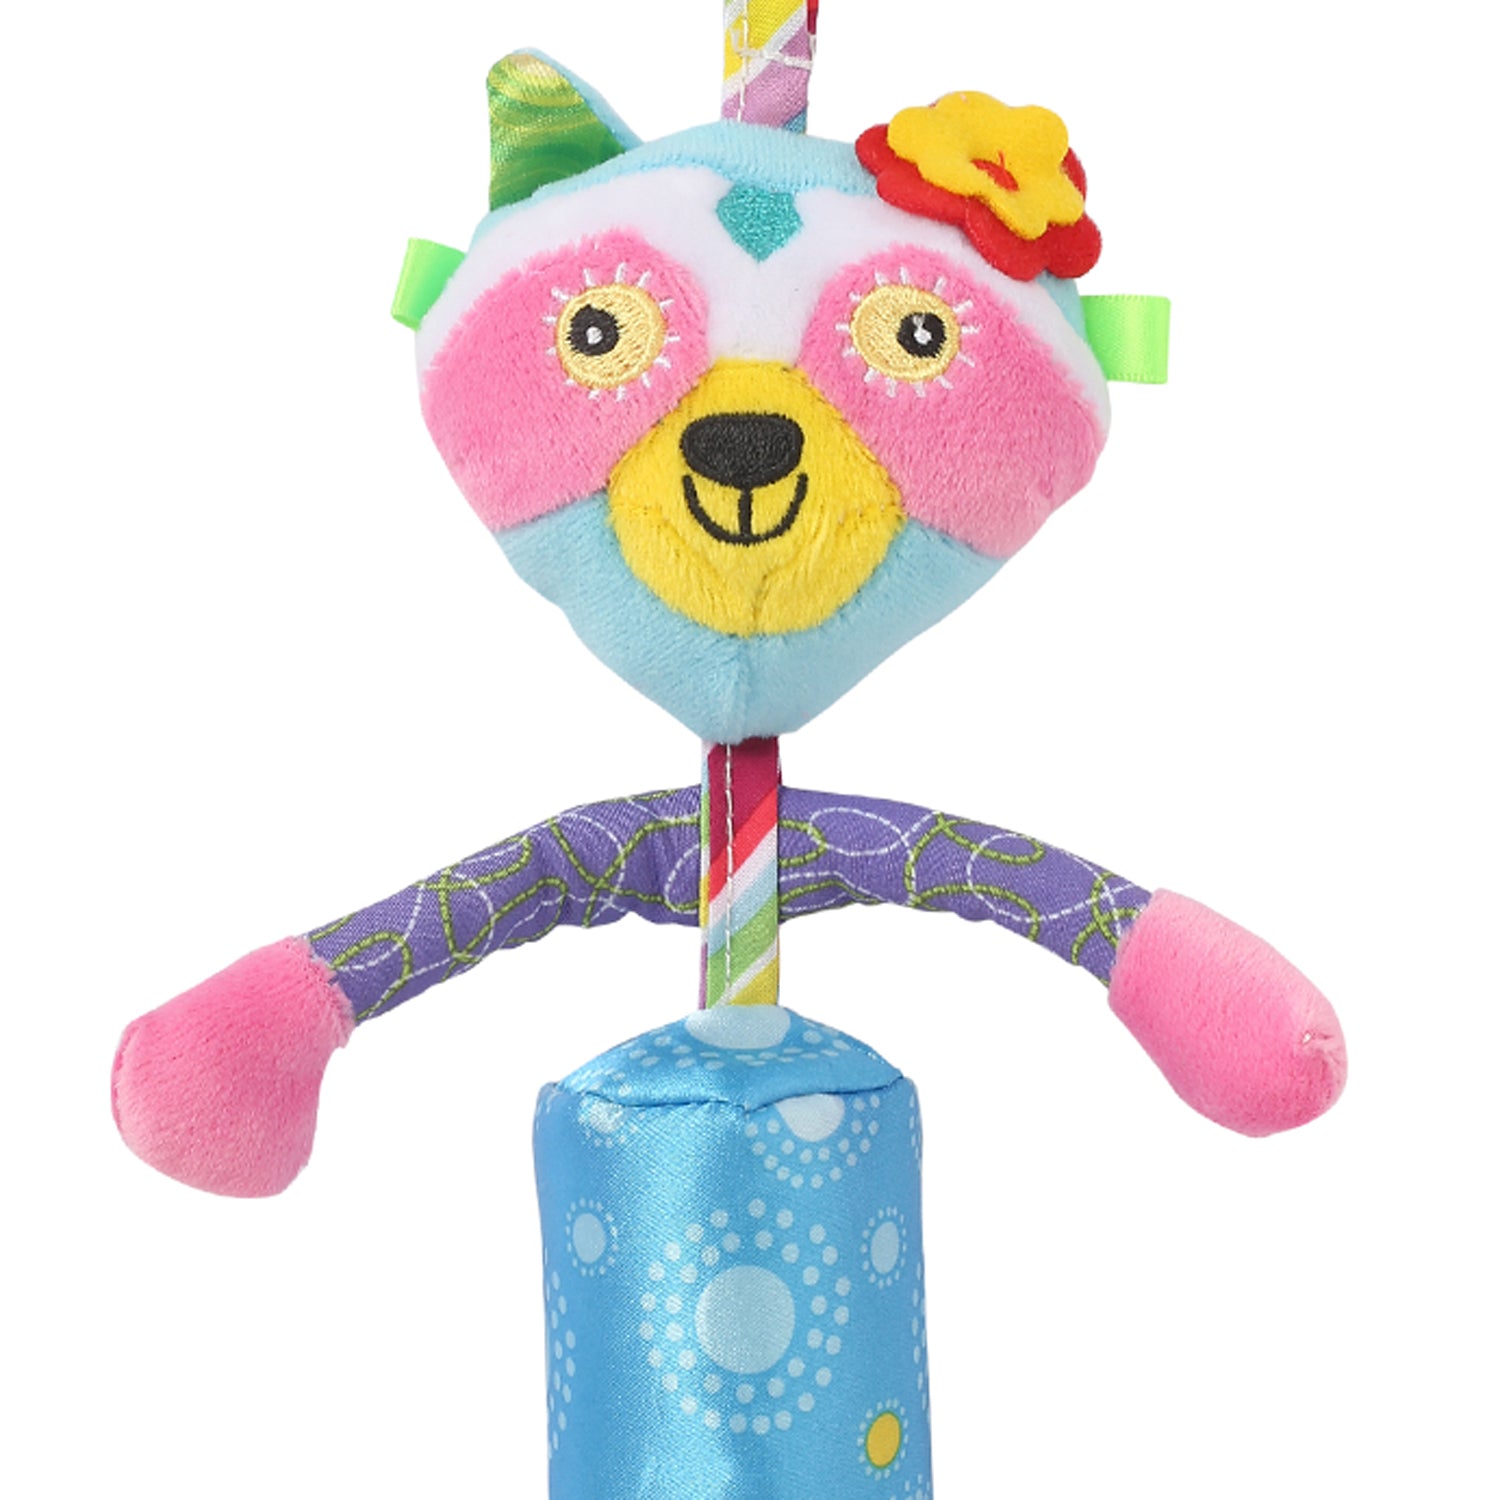 My Best Friend Pink And Blue Hanging Musical Toy / Wind Chime Soft Rattle